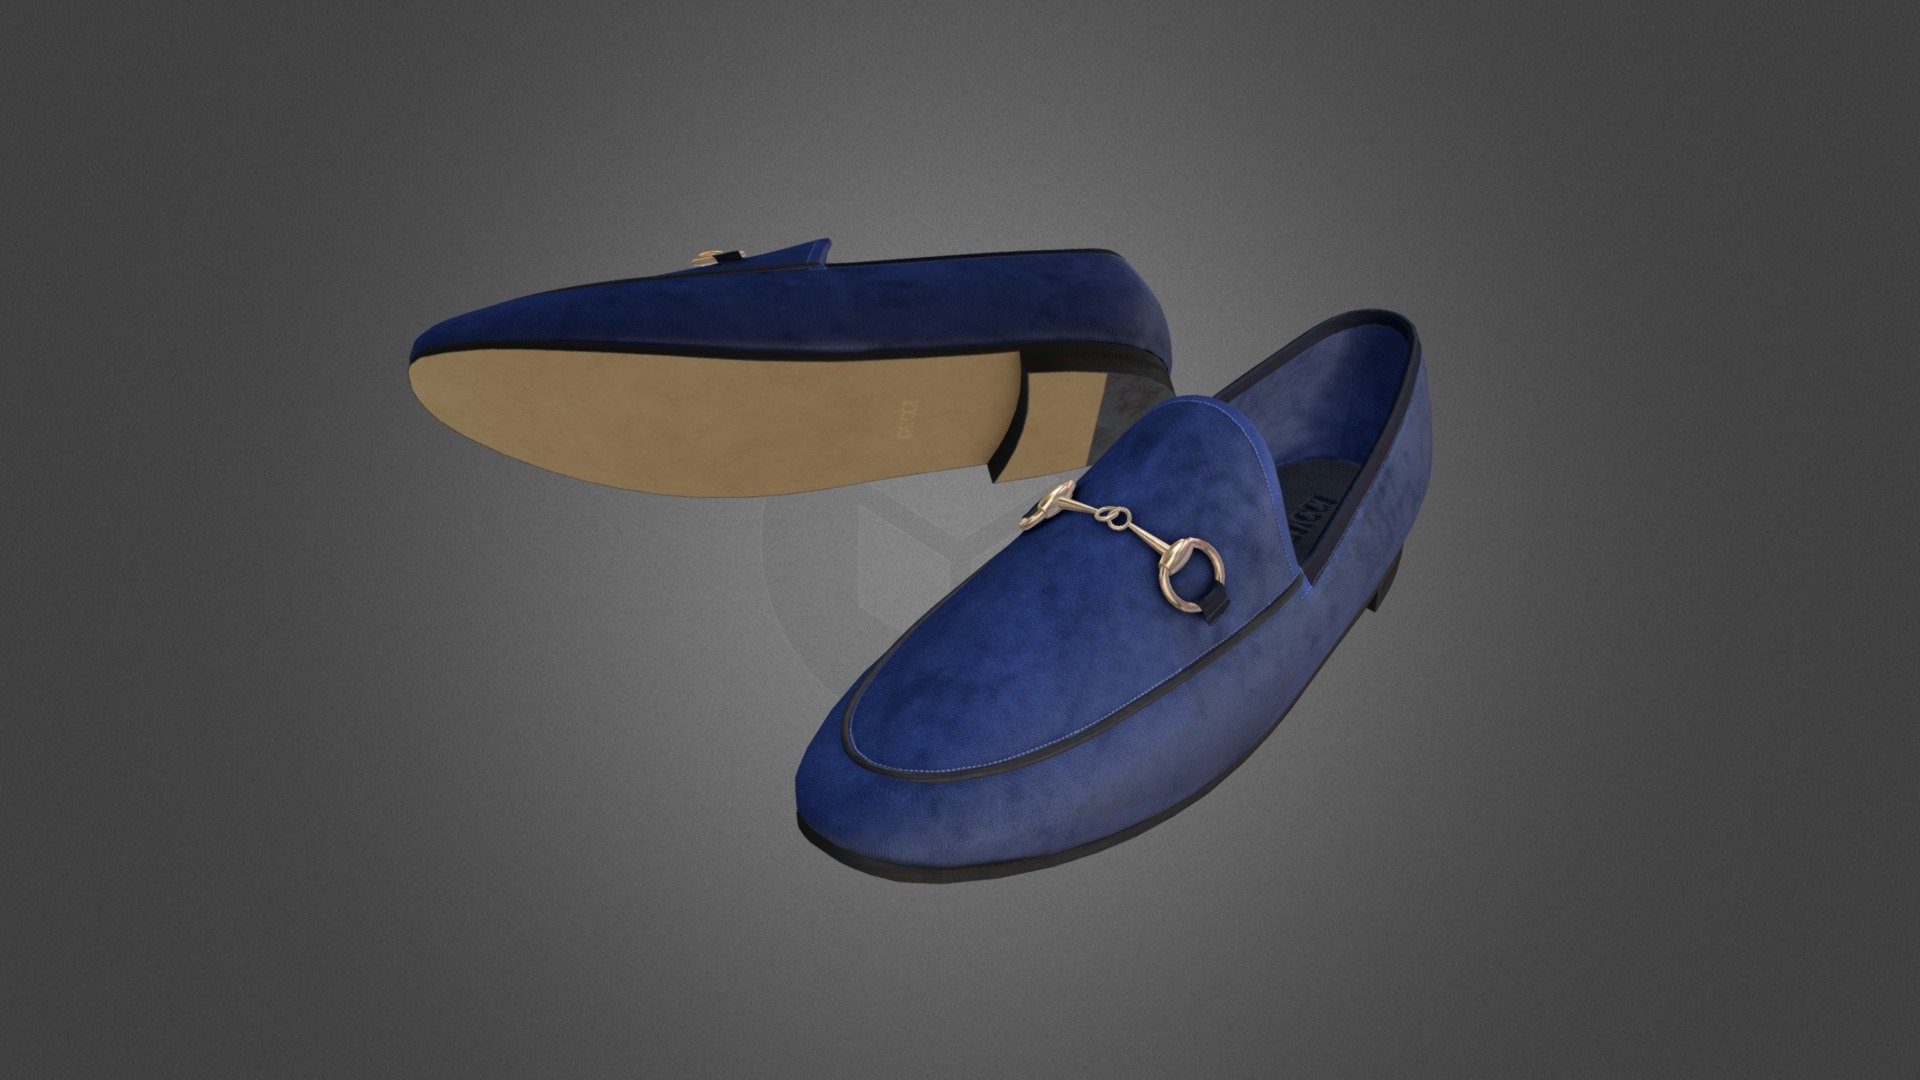 Velvet loafers.

zip archive contains files:

Gucci(2017).max, Gucci.3DS, Gucci.FBX, Gucci.obj, Gucci.stl.

and textures:

GUCCI_Albedo.png, GUCCI_AO.png, GUCCI_Metallic.png, GUCCI_Normal.png, GUCCI_Roughness.png

The model is located in coordinates 0.0.0 - Velvet loafers - Buy Royalty Free 3D model by STmodels (@gravchik) 3d model